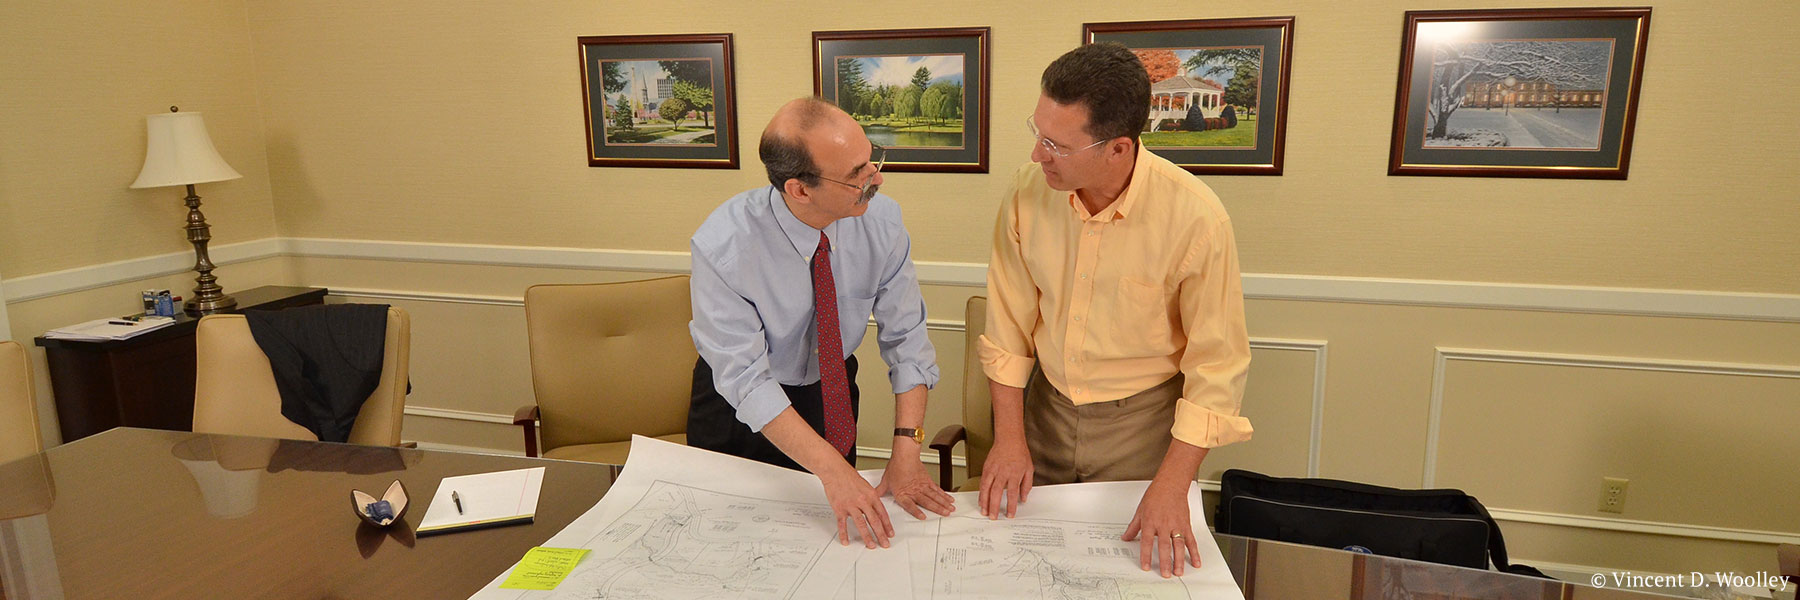 Warren County, New York lawyer Neil Lebowitz in a mock meeting with a client discussing a real estate site plan. Photographer: Vincent D. Woolley. Copyright owner-licensor: Vincent D. Woolley. Copyright licensee: Neil H. Lebowitz.